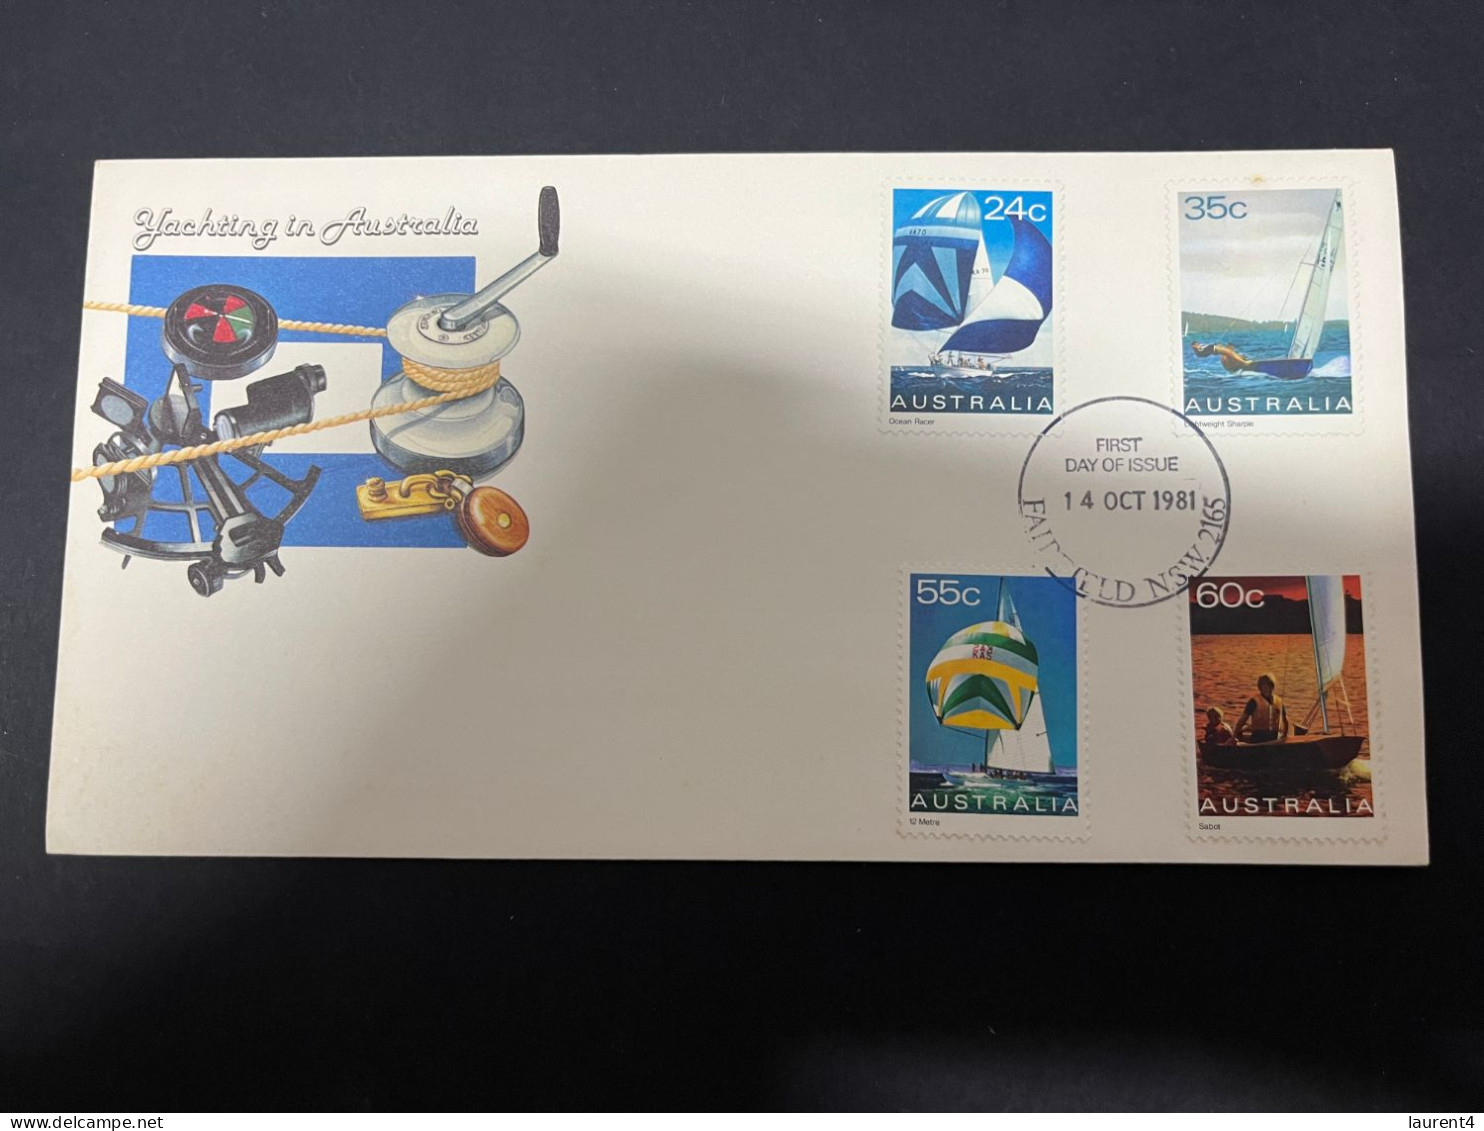 15-11-2023 (2 V 18) Australia - FDC (3 With Different Postmarks) 14-101981 - Yachting In Australia - Other (Sea)